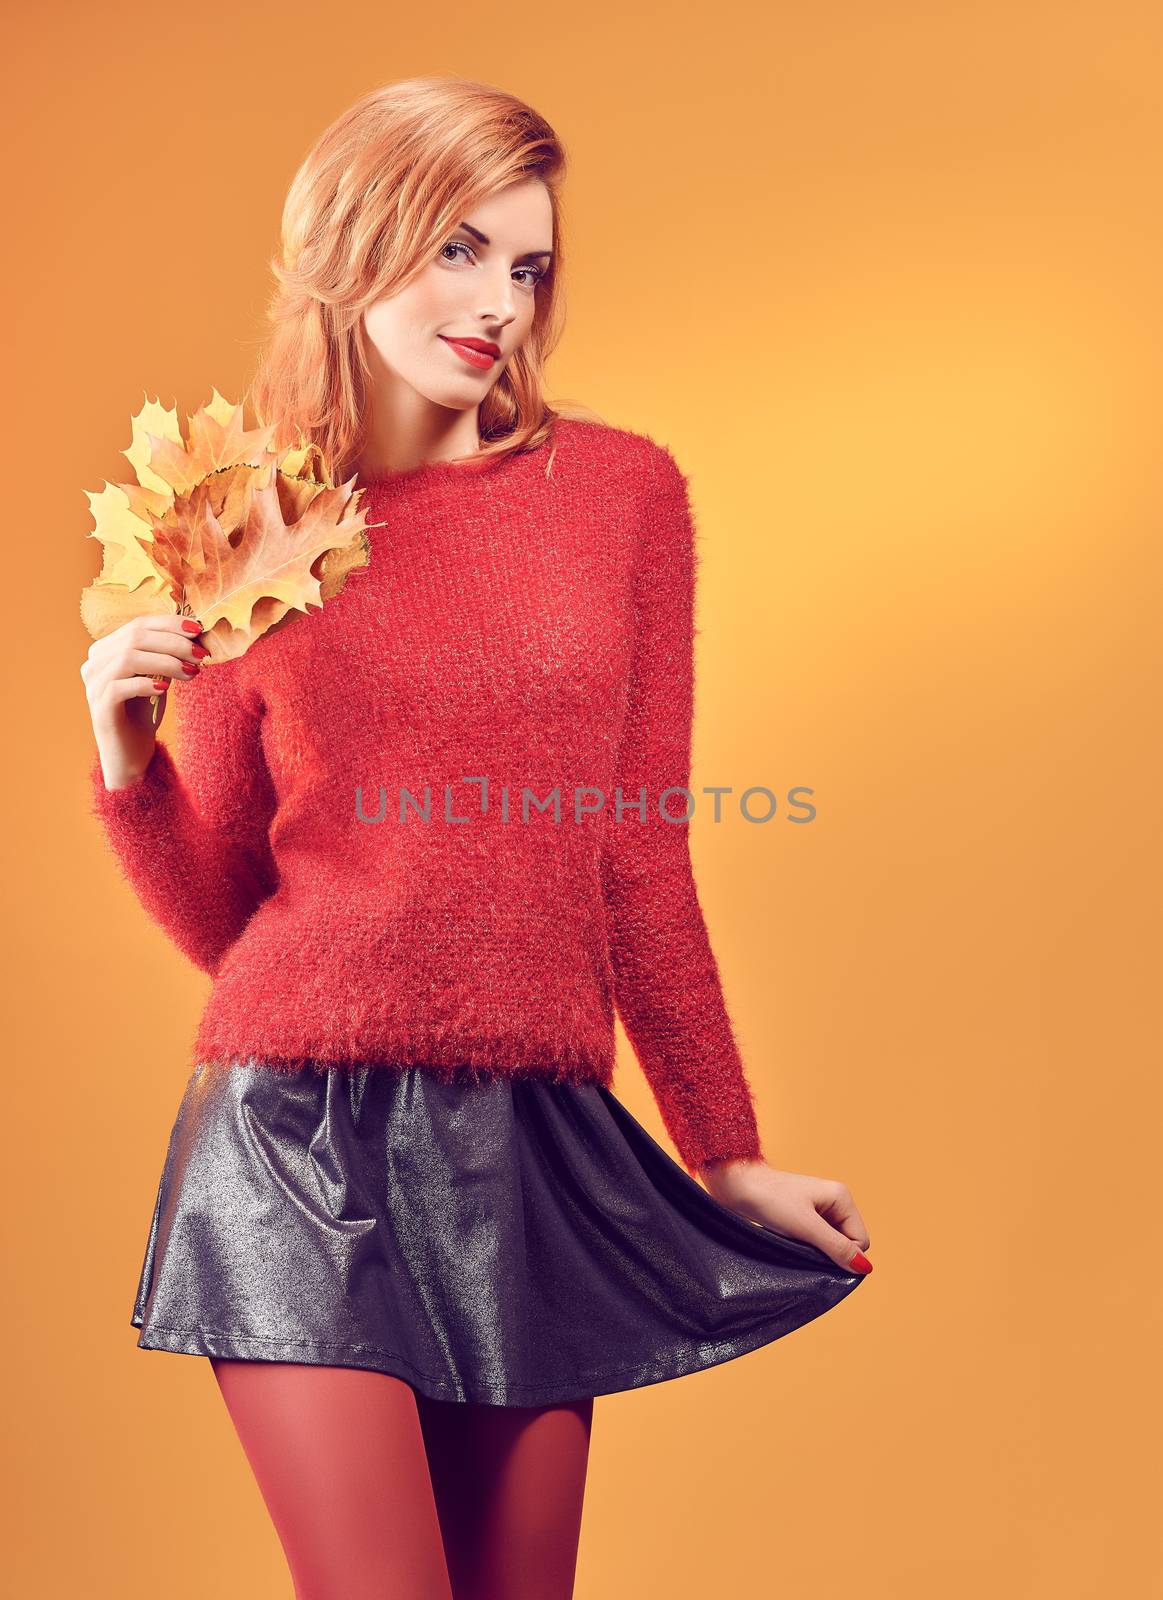 Beauty portrait redhead young model woman, autumn leafs in hands. Attractive happy playful girl in stylish red sweater smiling, people.Retro, vintage, creative toned.Orange yellow background,copyspace